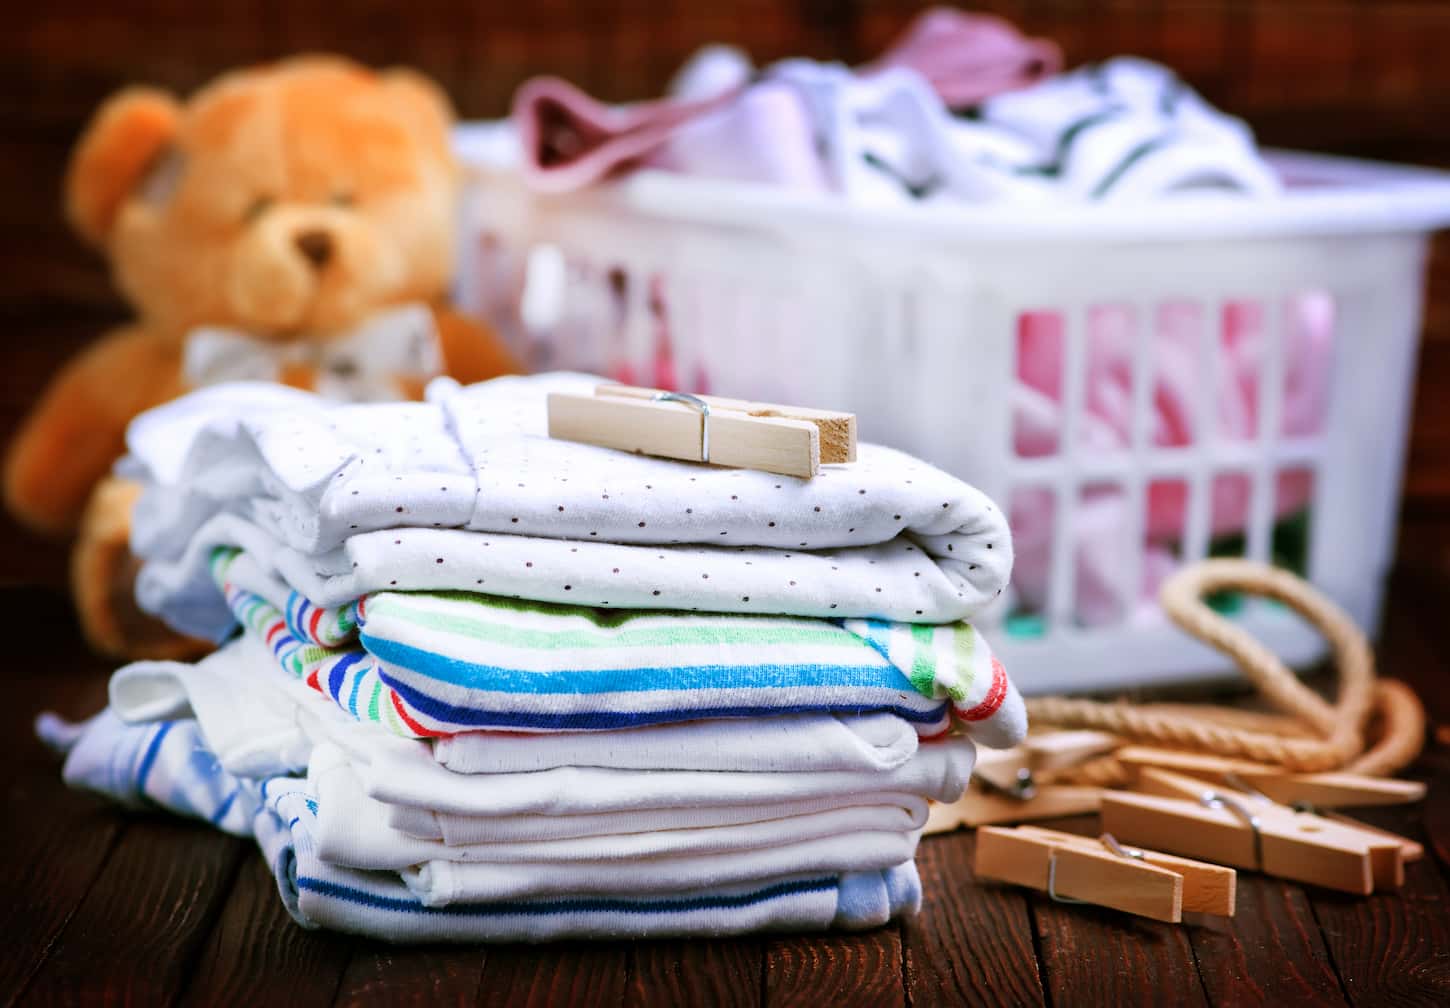 An image of baby clothes on the wooden table with a teddy bear and a basket on the blurred background.